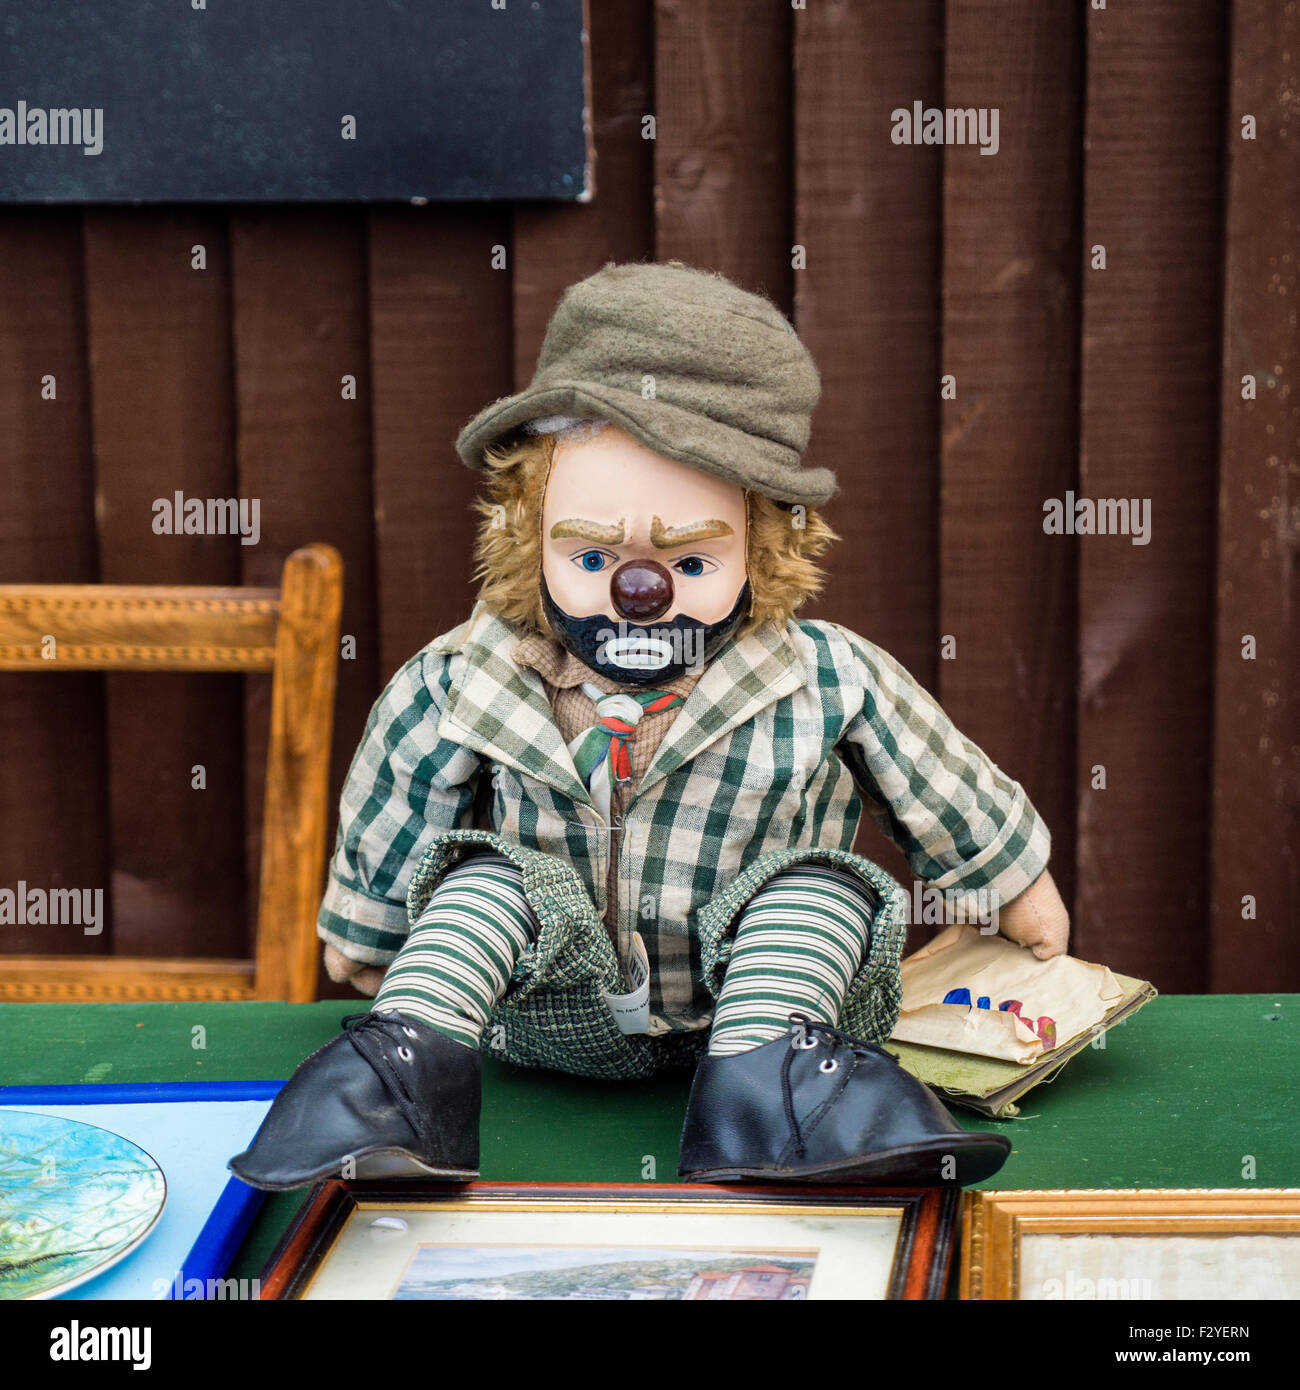 Flea Market, Greenwich, London. Collectibles, clown doll at market stall Stock Photo